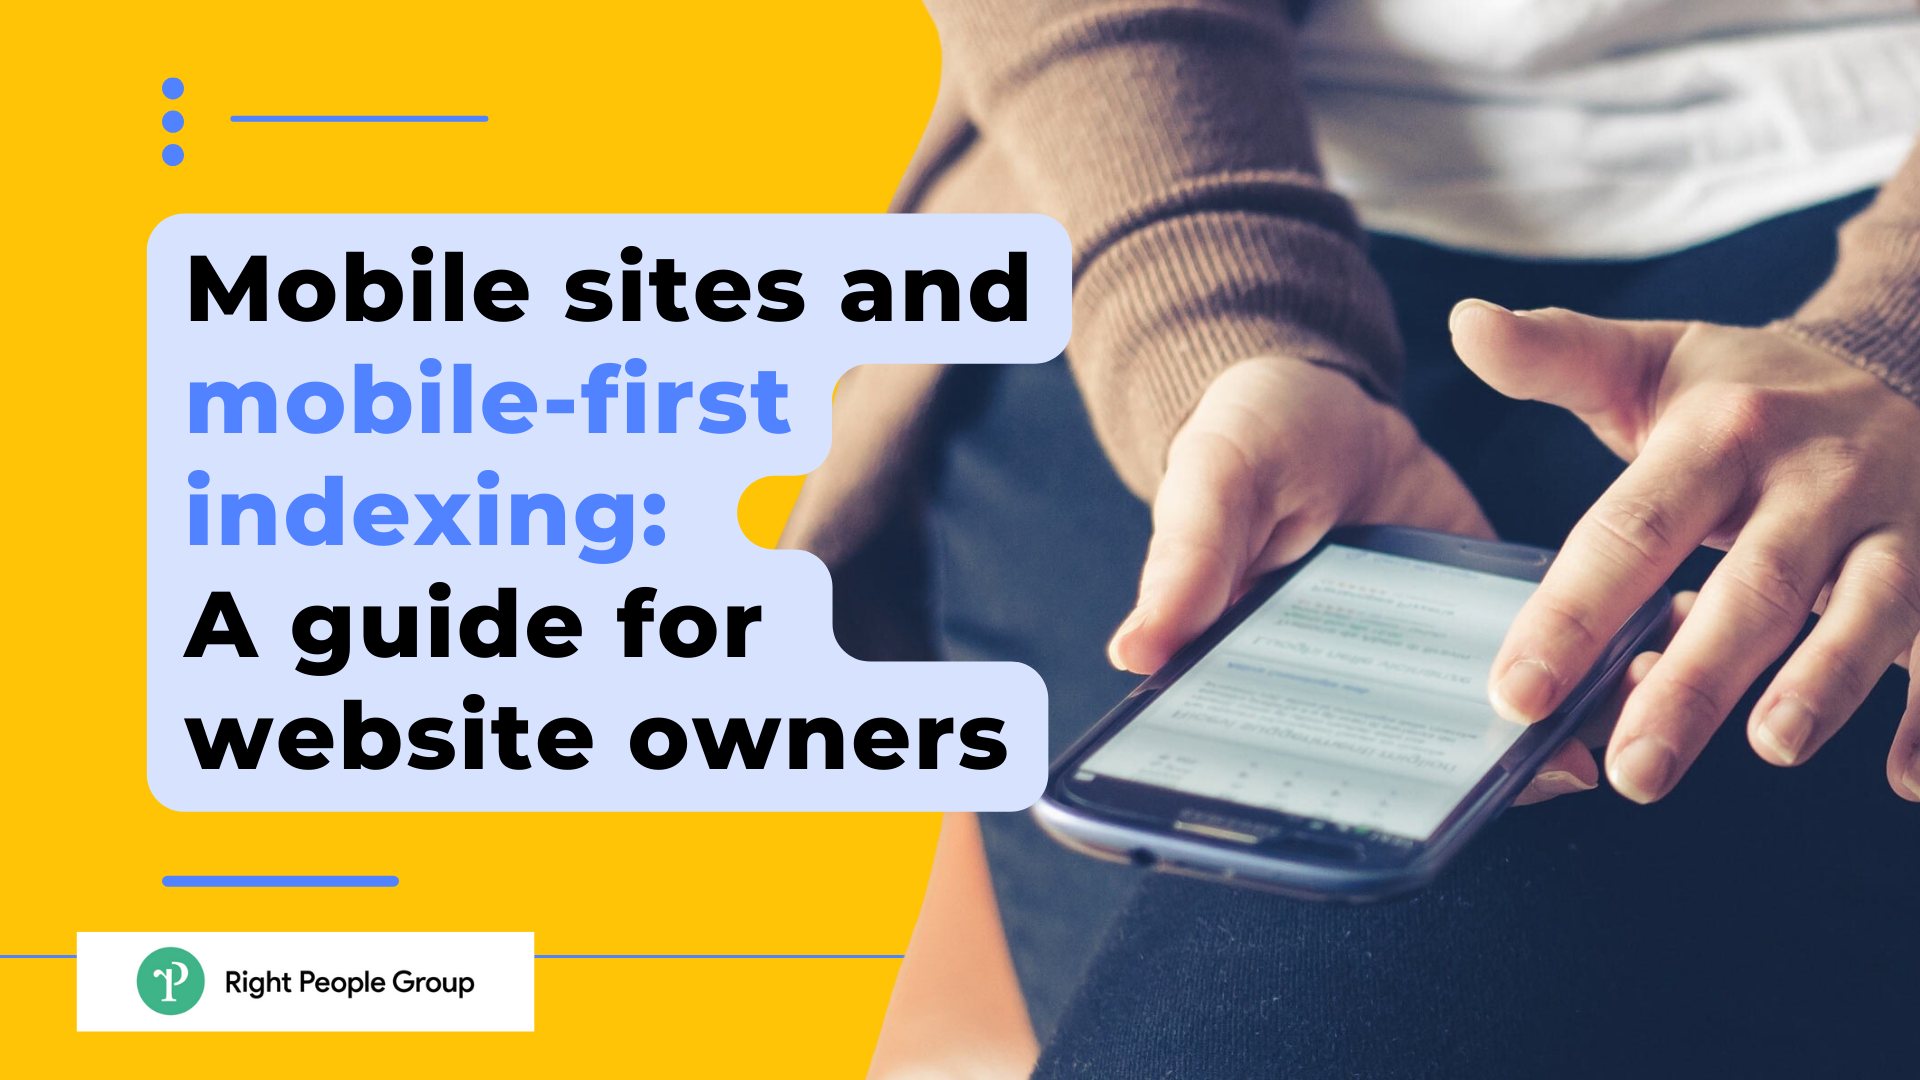 Mobile sites and mobile-first indexing: A guide for website owners